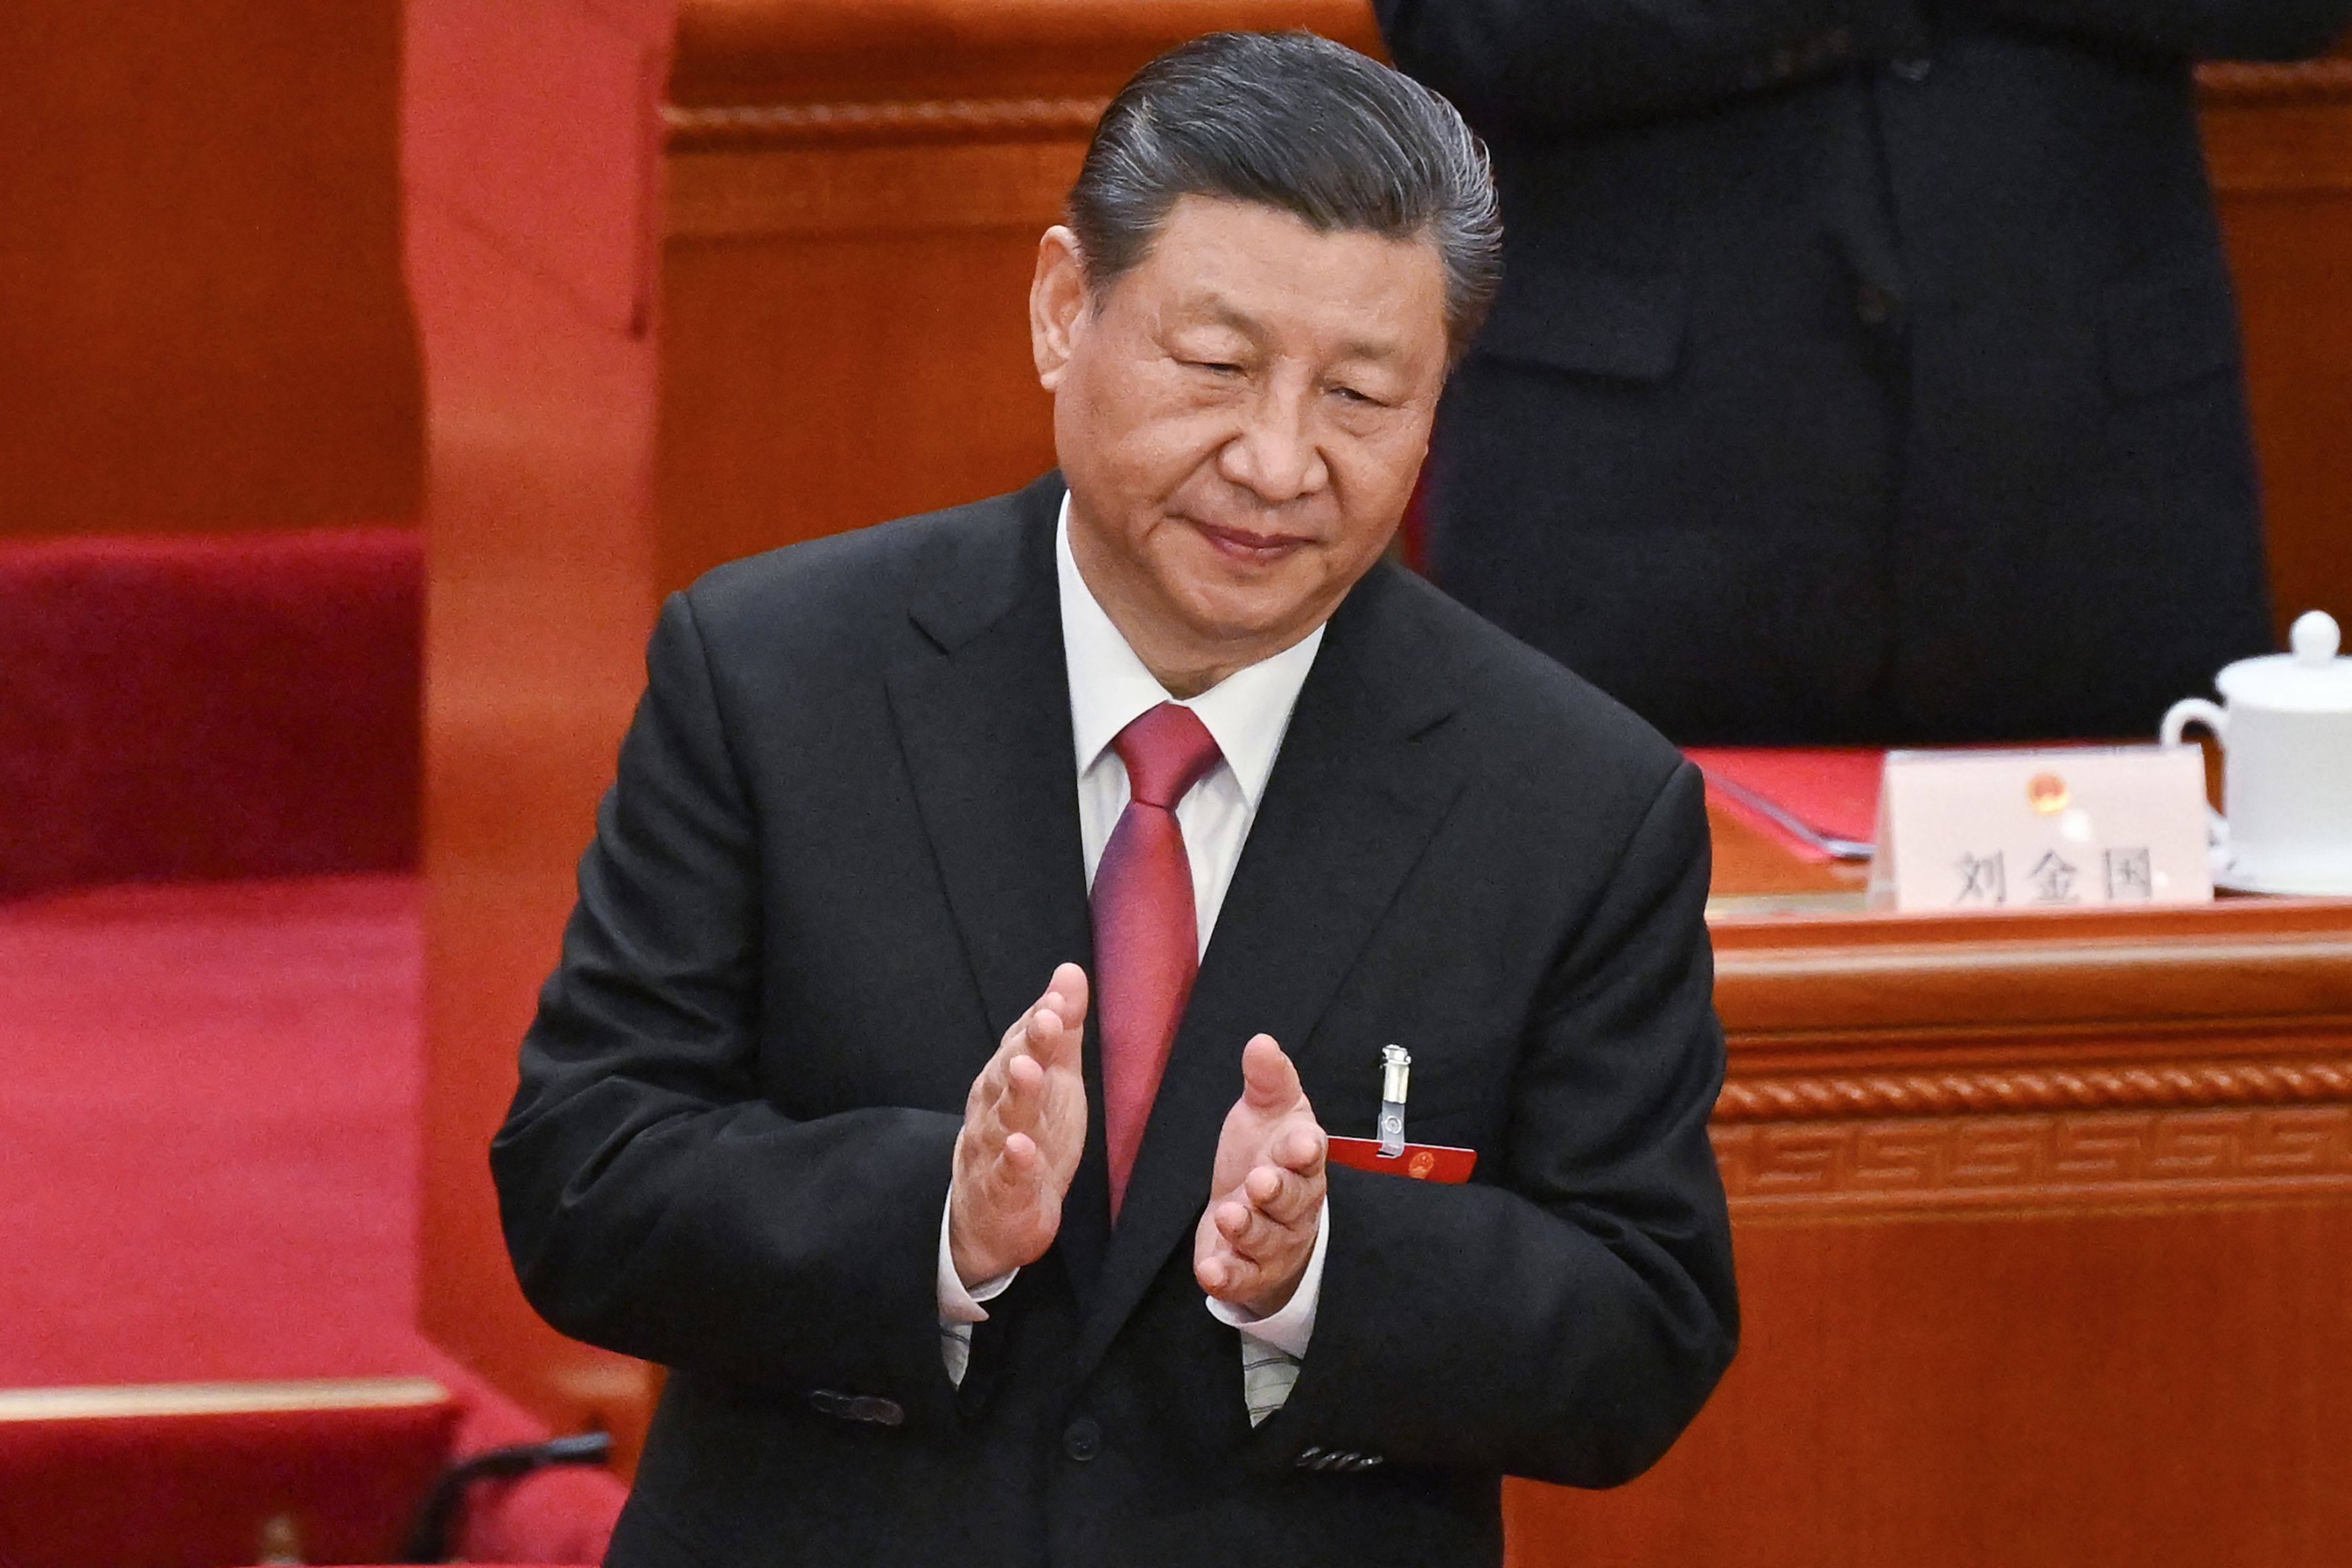 China’s President Xi Jinping applauds at the end of the closing session of the 14th National People’s Congress at the Great Hall of the People in Beijing on March 11. Photo: AFP